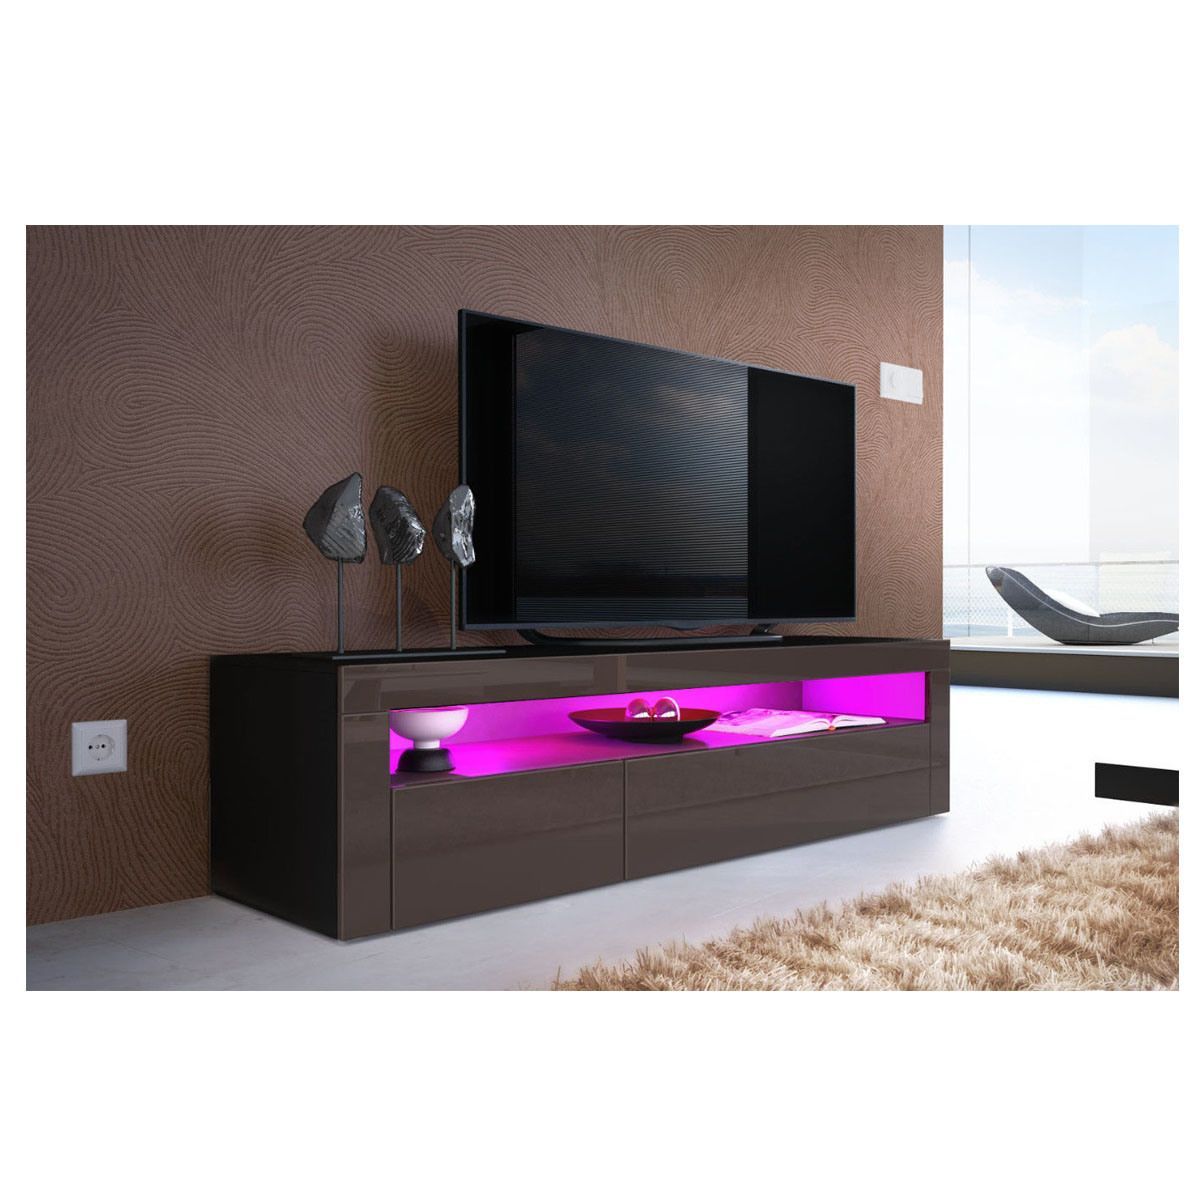 China High Gloss Uv Black Led Light Sideboard Tv Unit In Polar Led Tv Stands (Gallery 13 of 20)